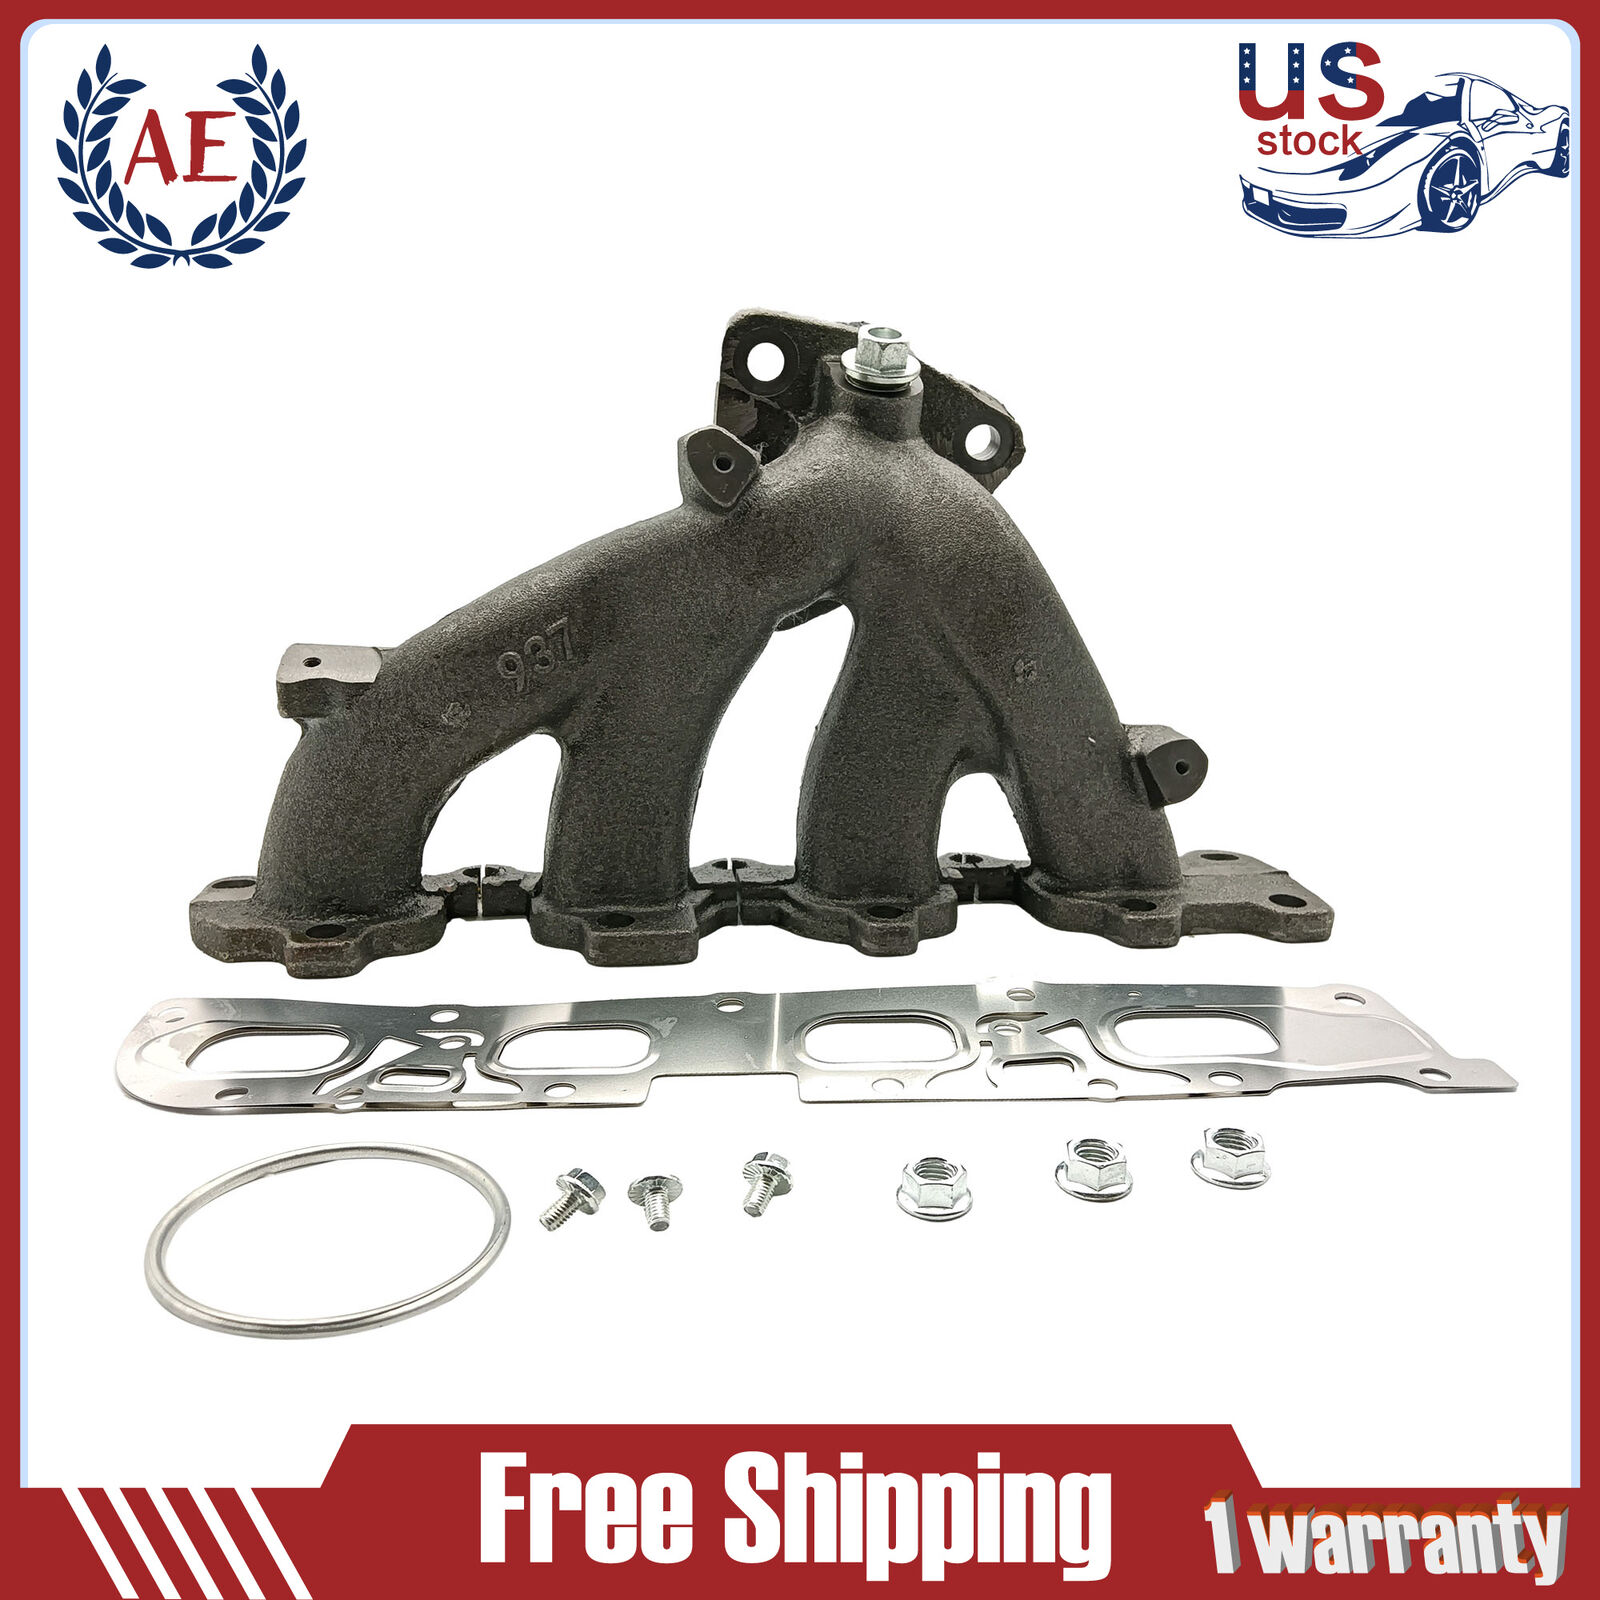 Exhaust Manifold w/ Gasket Kit For Chevrolet Buick Verano Saturn 674-937 2.4L L4